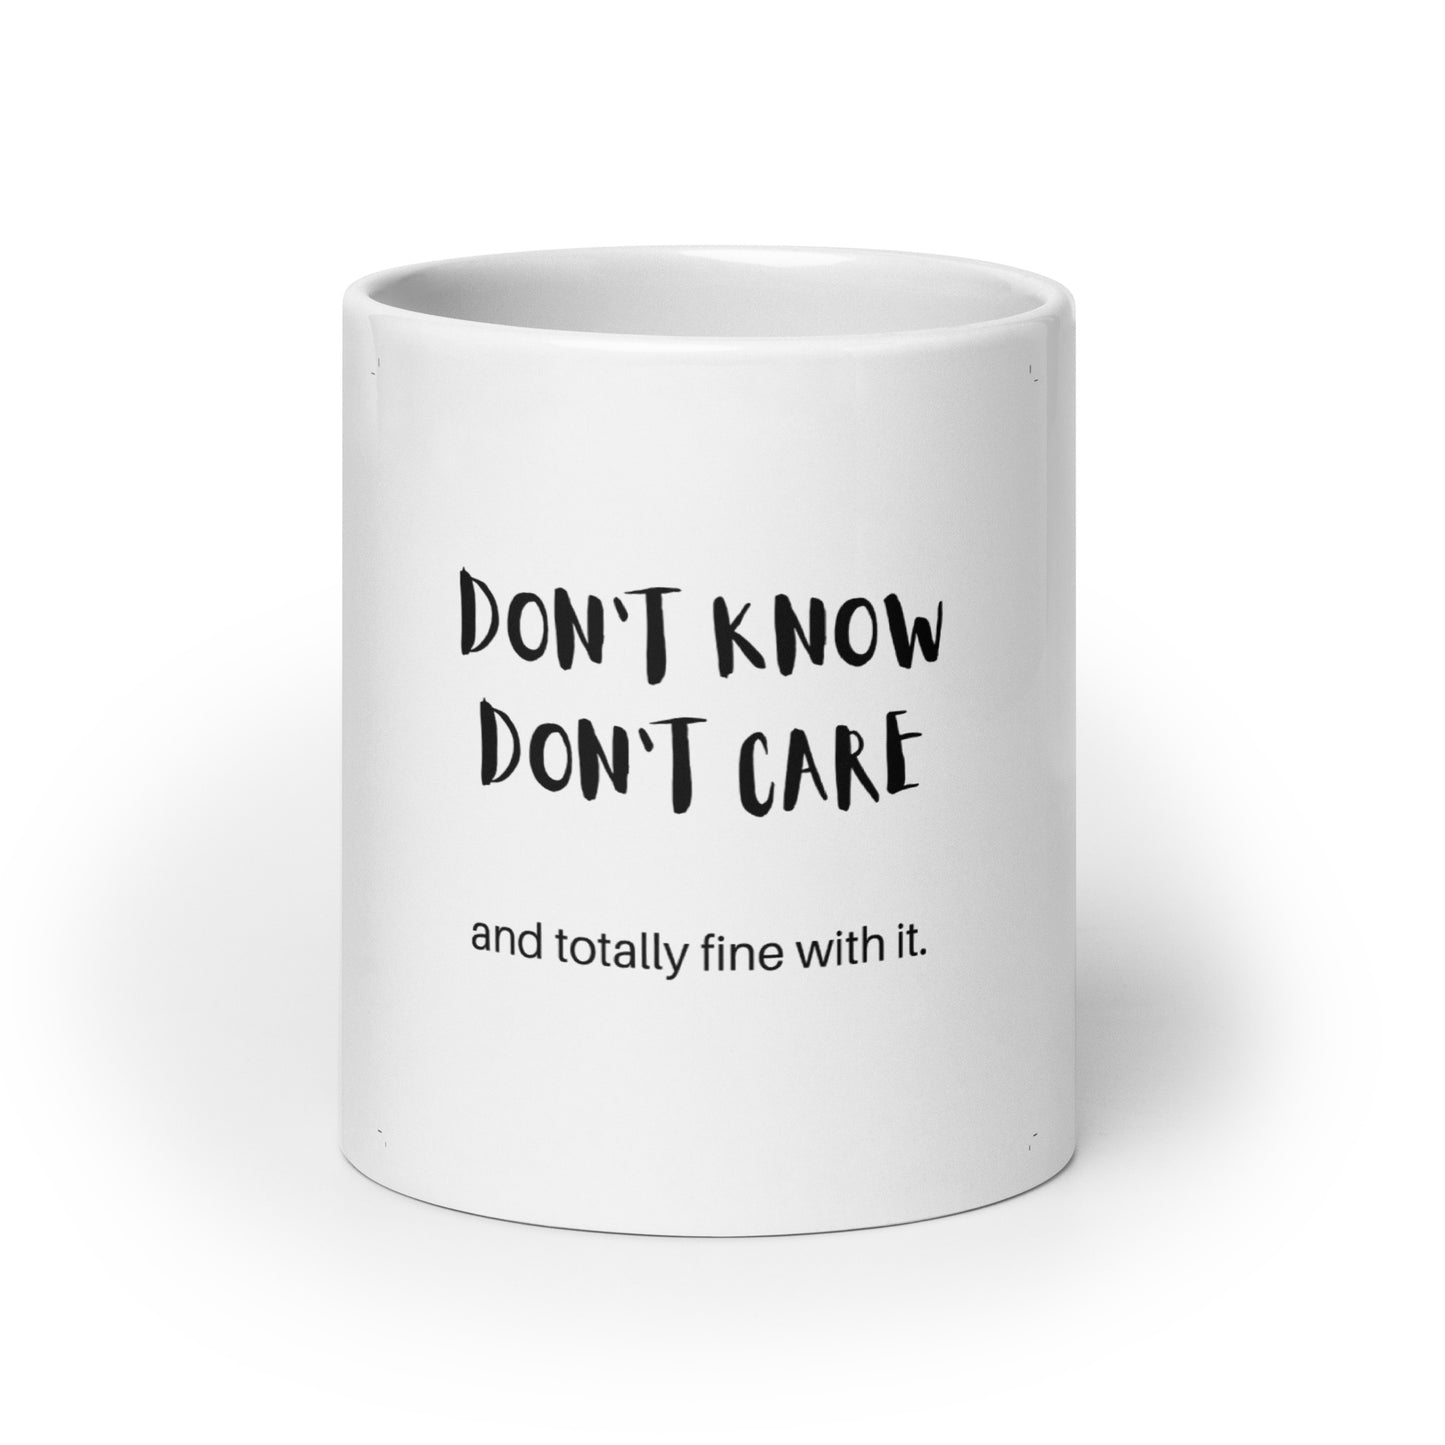 Don't Know Don't Care - White glossy mug